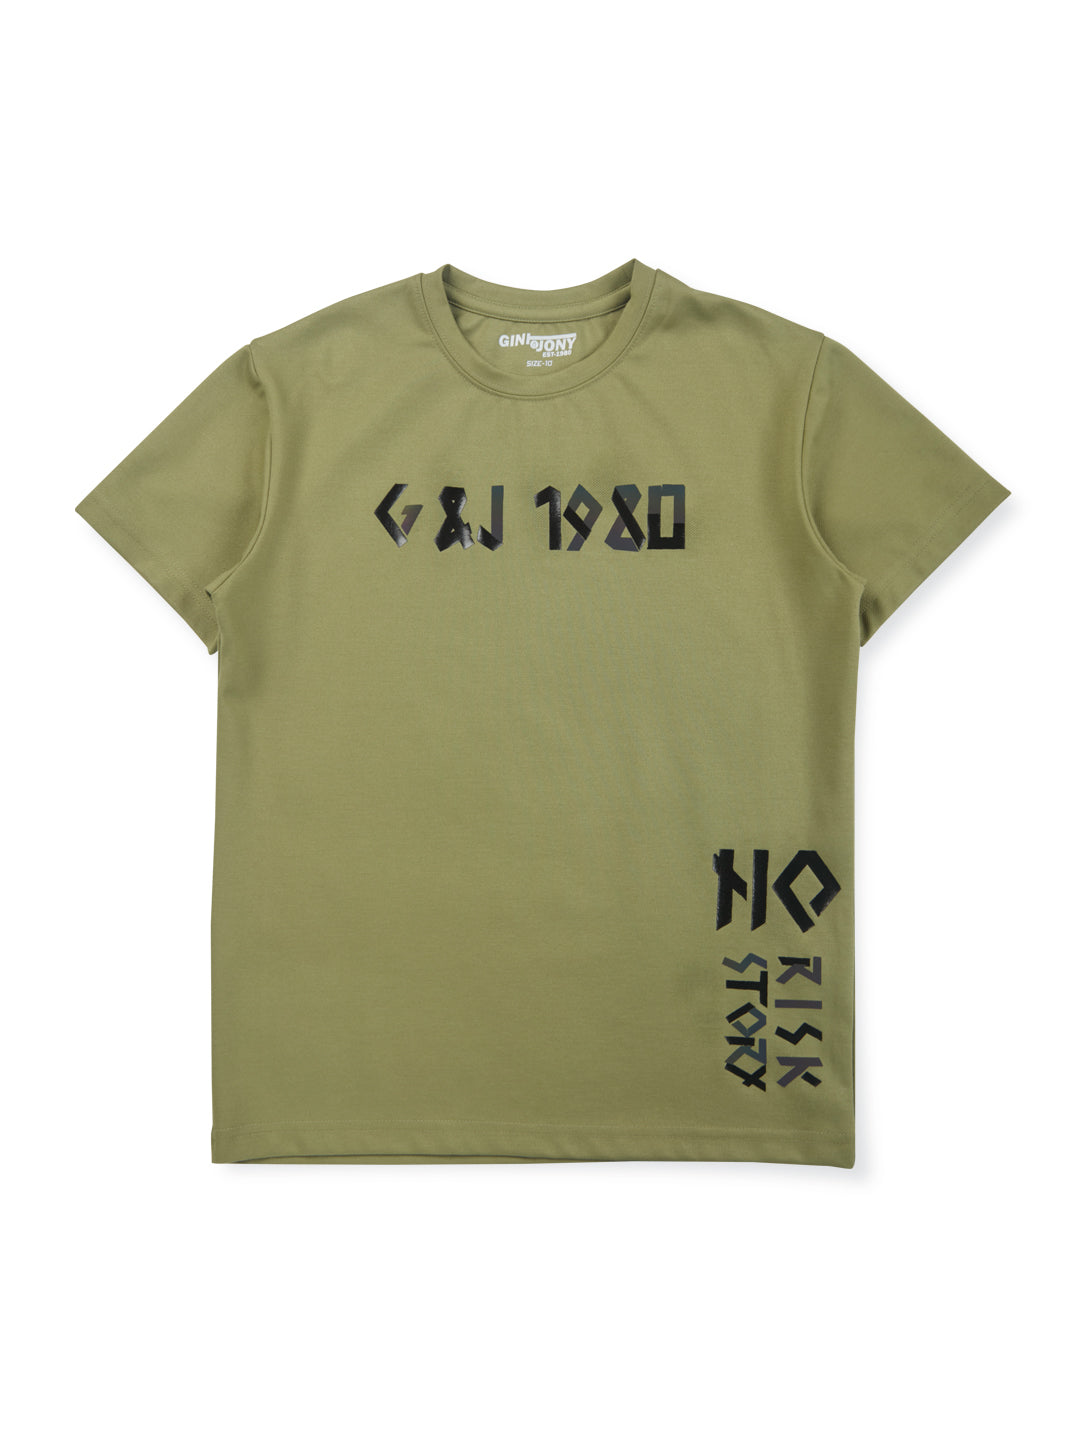 Boys green round neck knitted cotton printed t-shirt